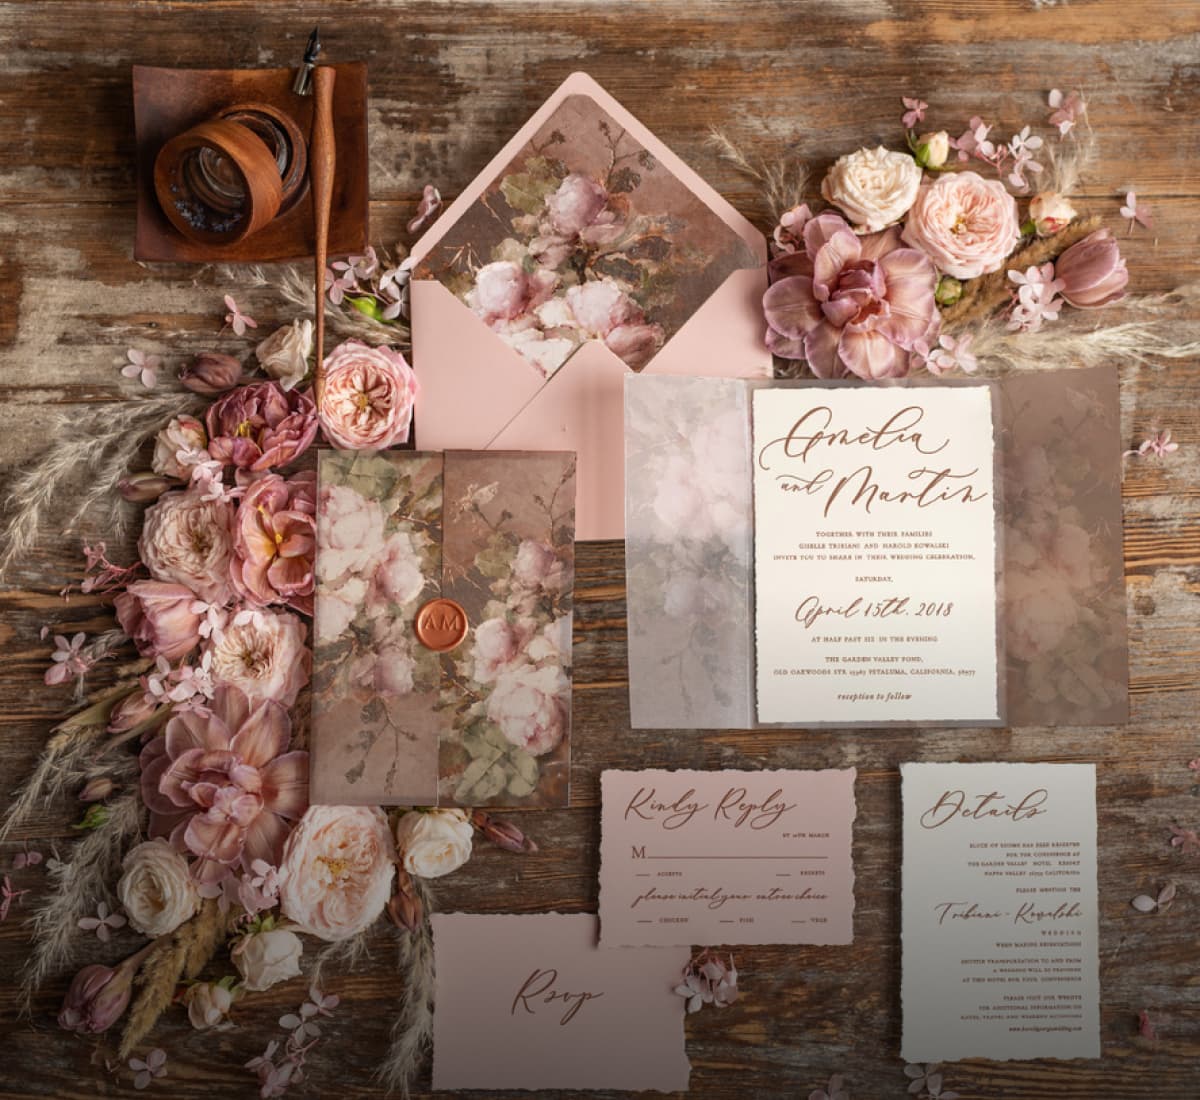 What is important to include in wedding invitations?